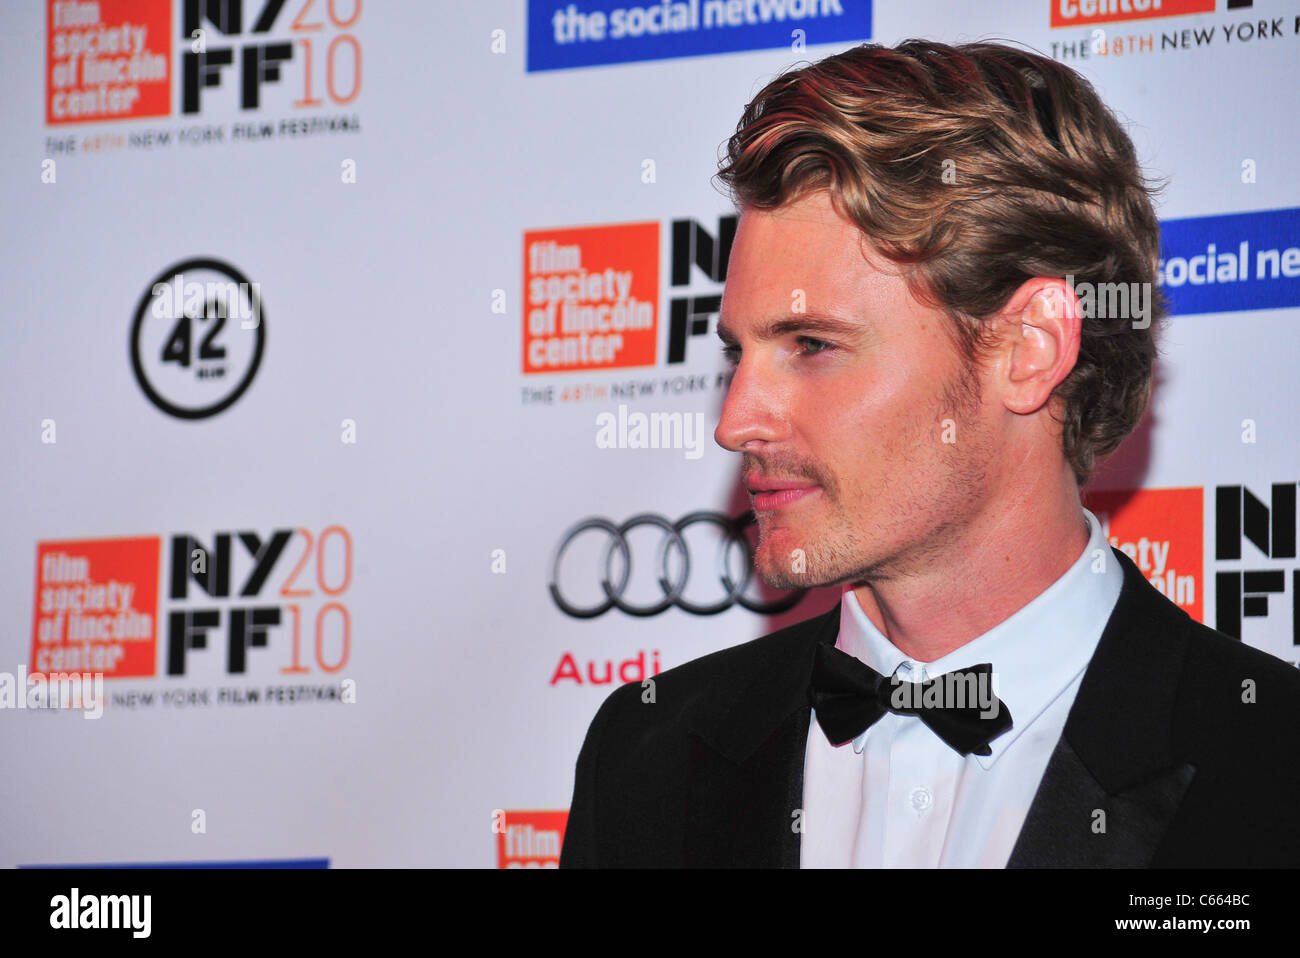 Josh Pence at arrivals for The 48th New York Film Festival Opening Night Premiere of THE SOCIAL NETWORK, Alice Tully Hall at Lincoln Center, New York, NY September 24, 2010. Photo By: Gregorio T. Binuya/Everett Collection Stock Photo